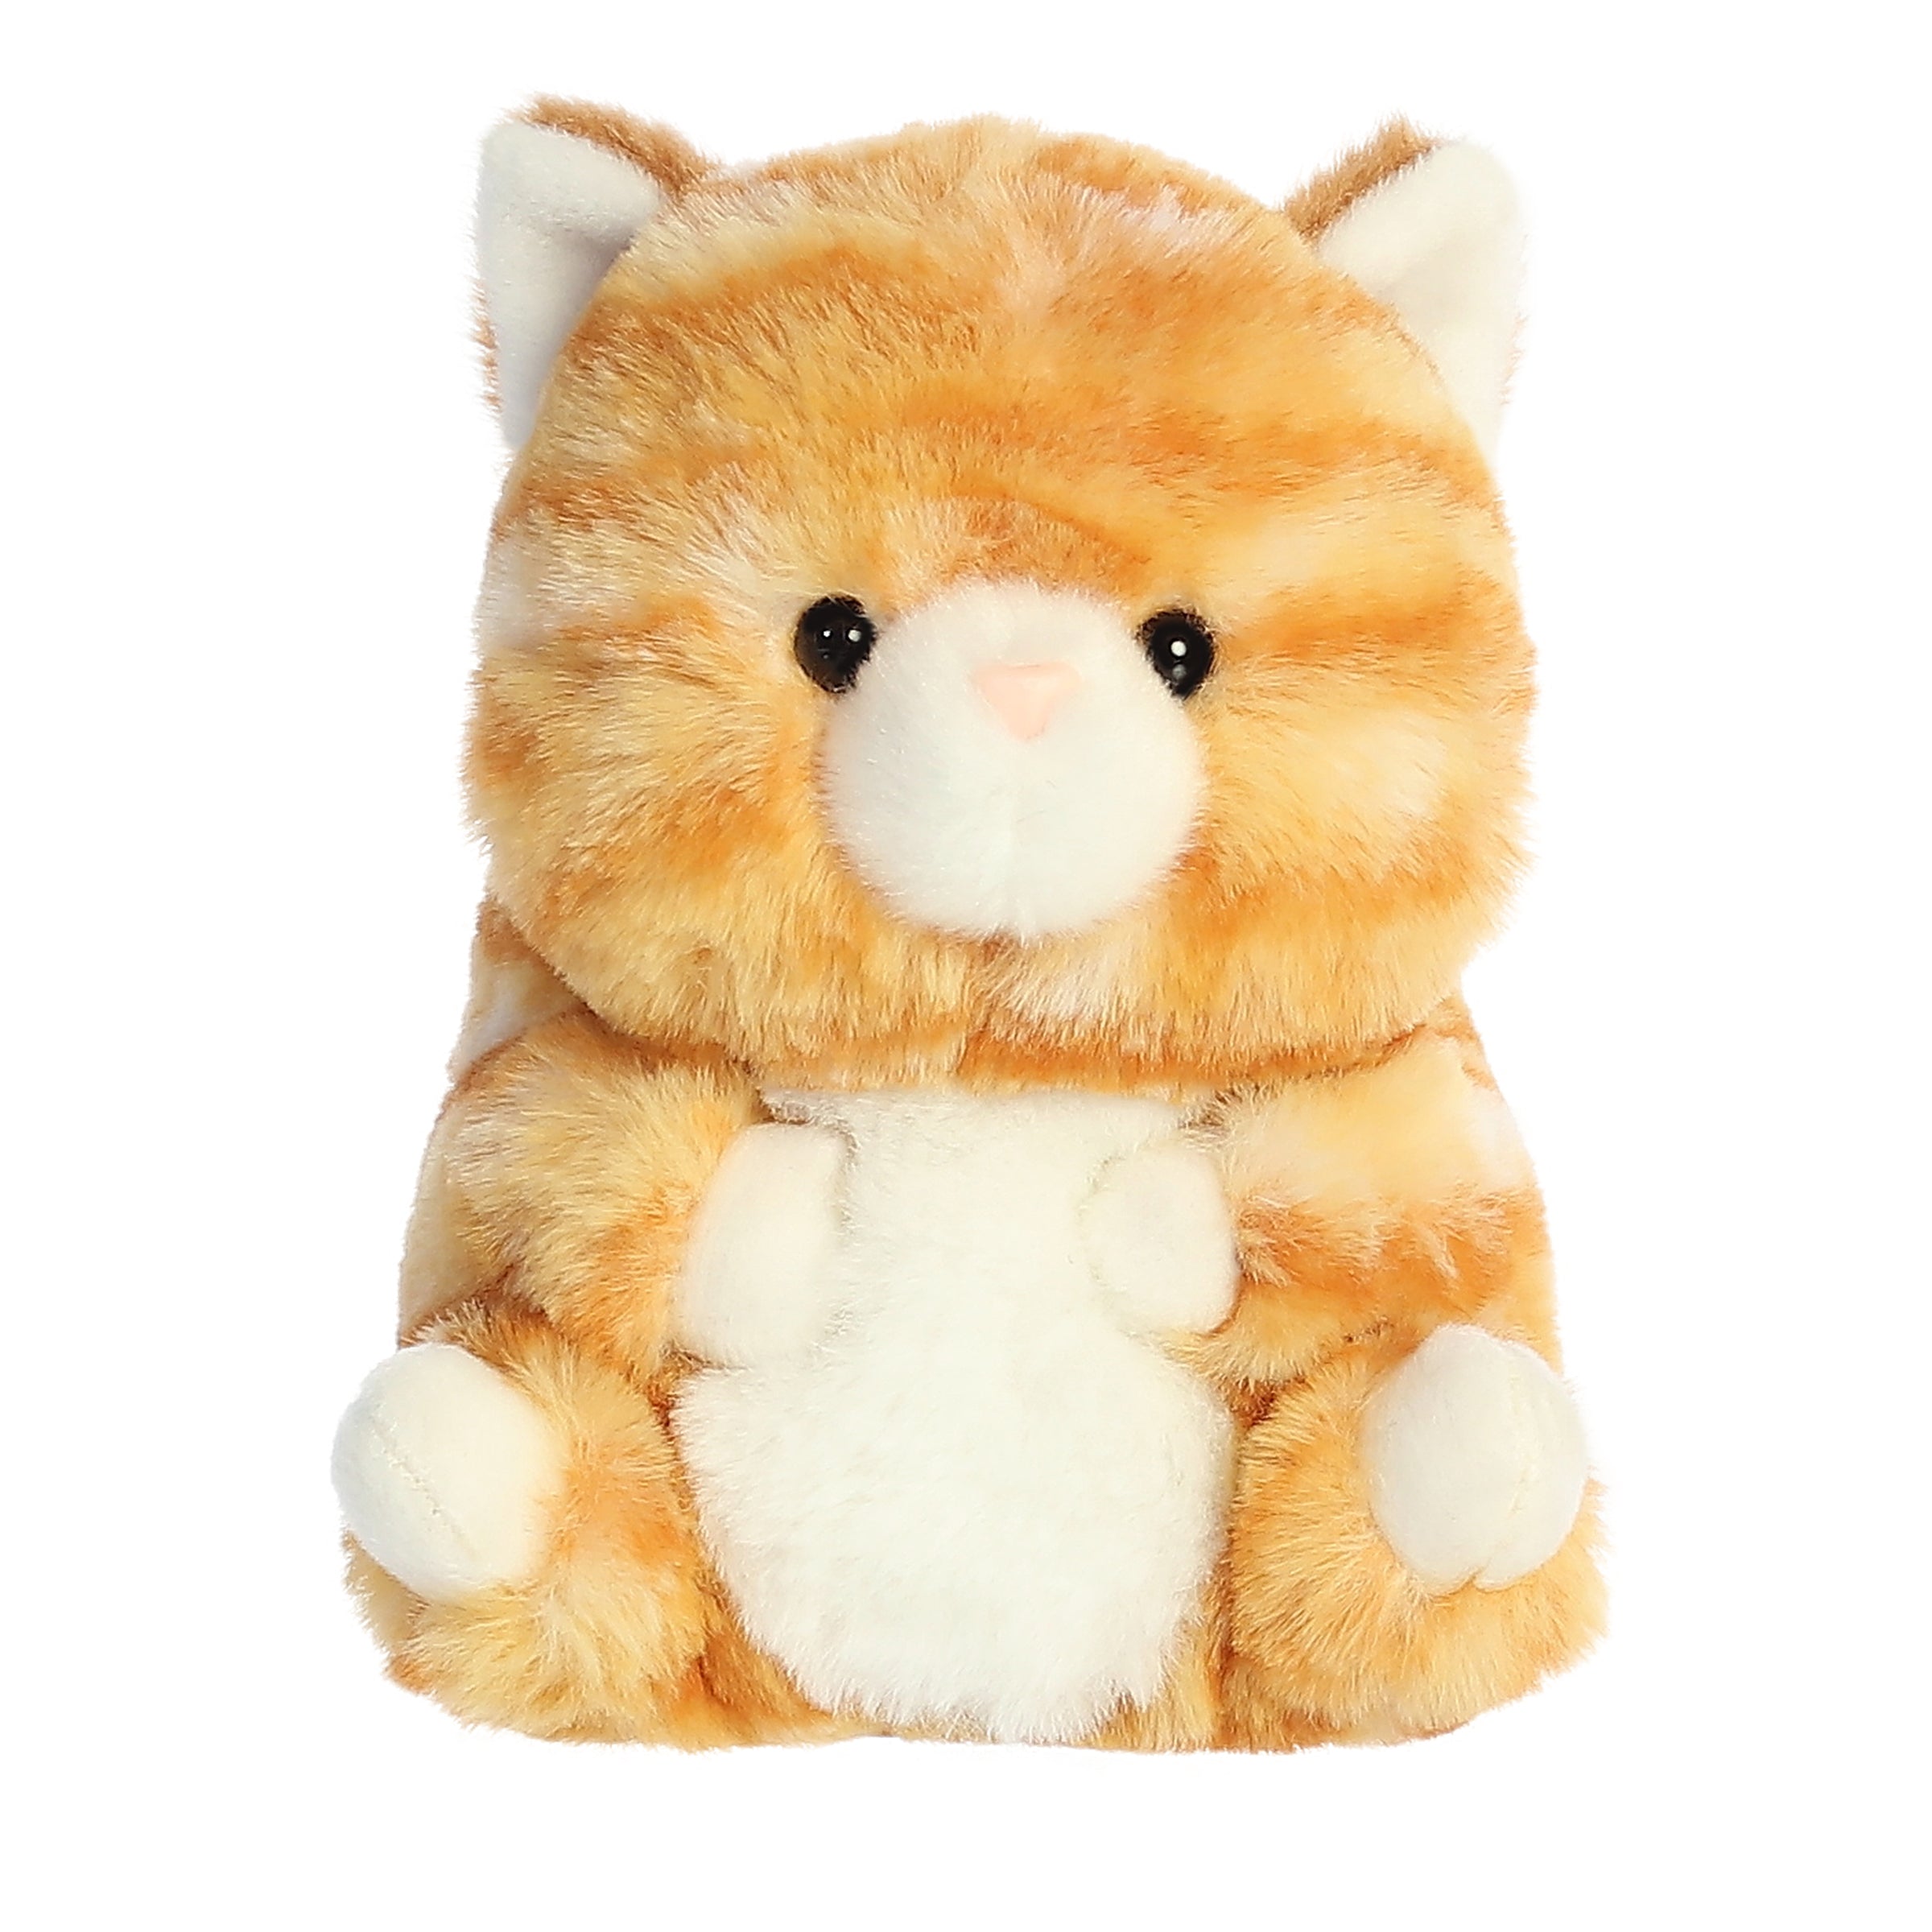 An adorable round kitten, orange-striped plush kitten, with its arms around its tummy and legs pointed upwards to the sky.